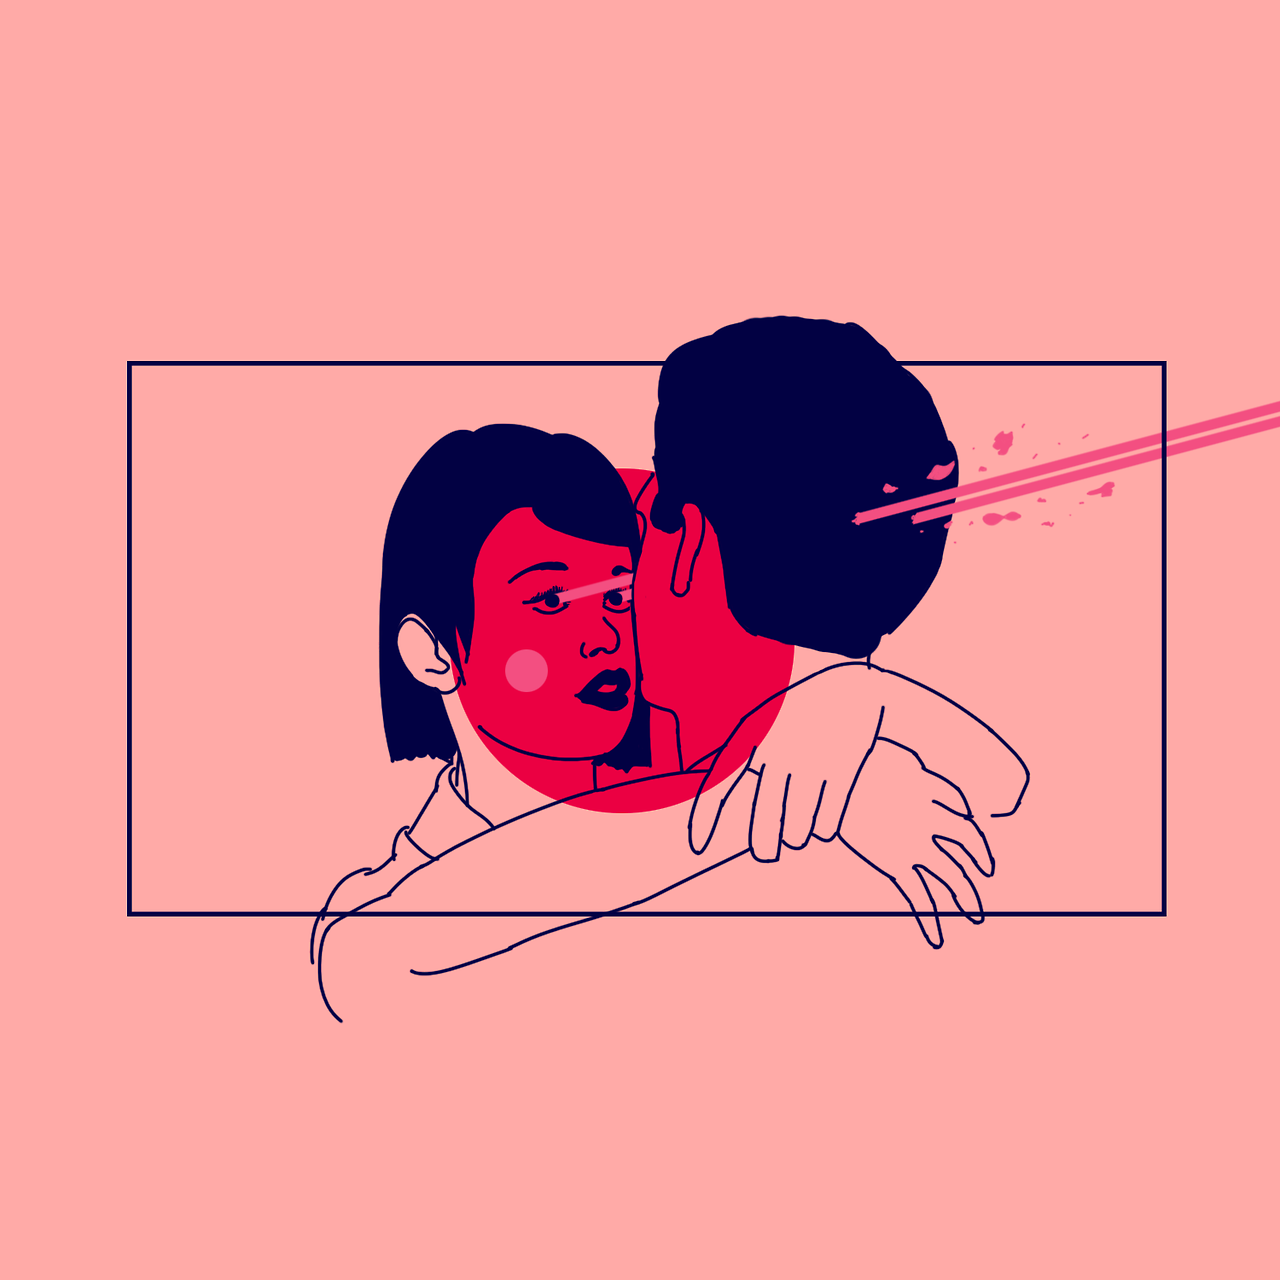 The way you look at me. — EatSleepDraw is working on something new and we want you to be the first to know about it. Make sure you’re on our email list.